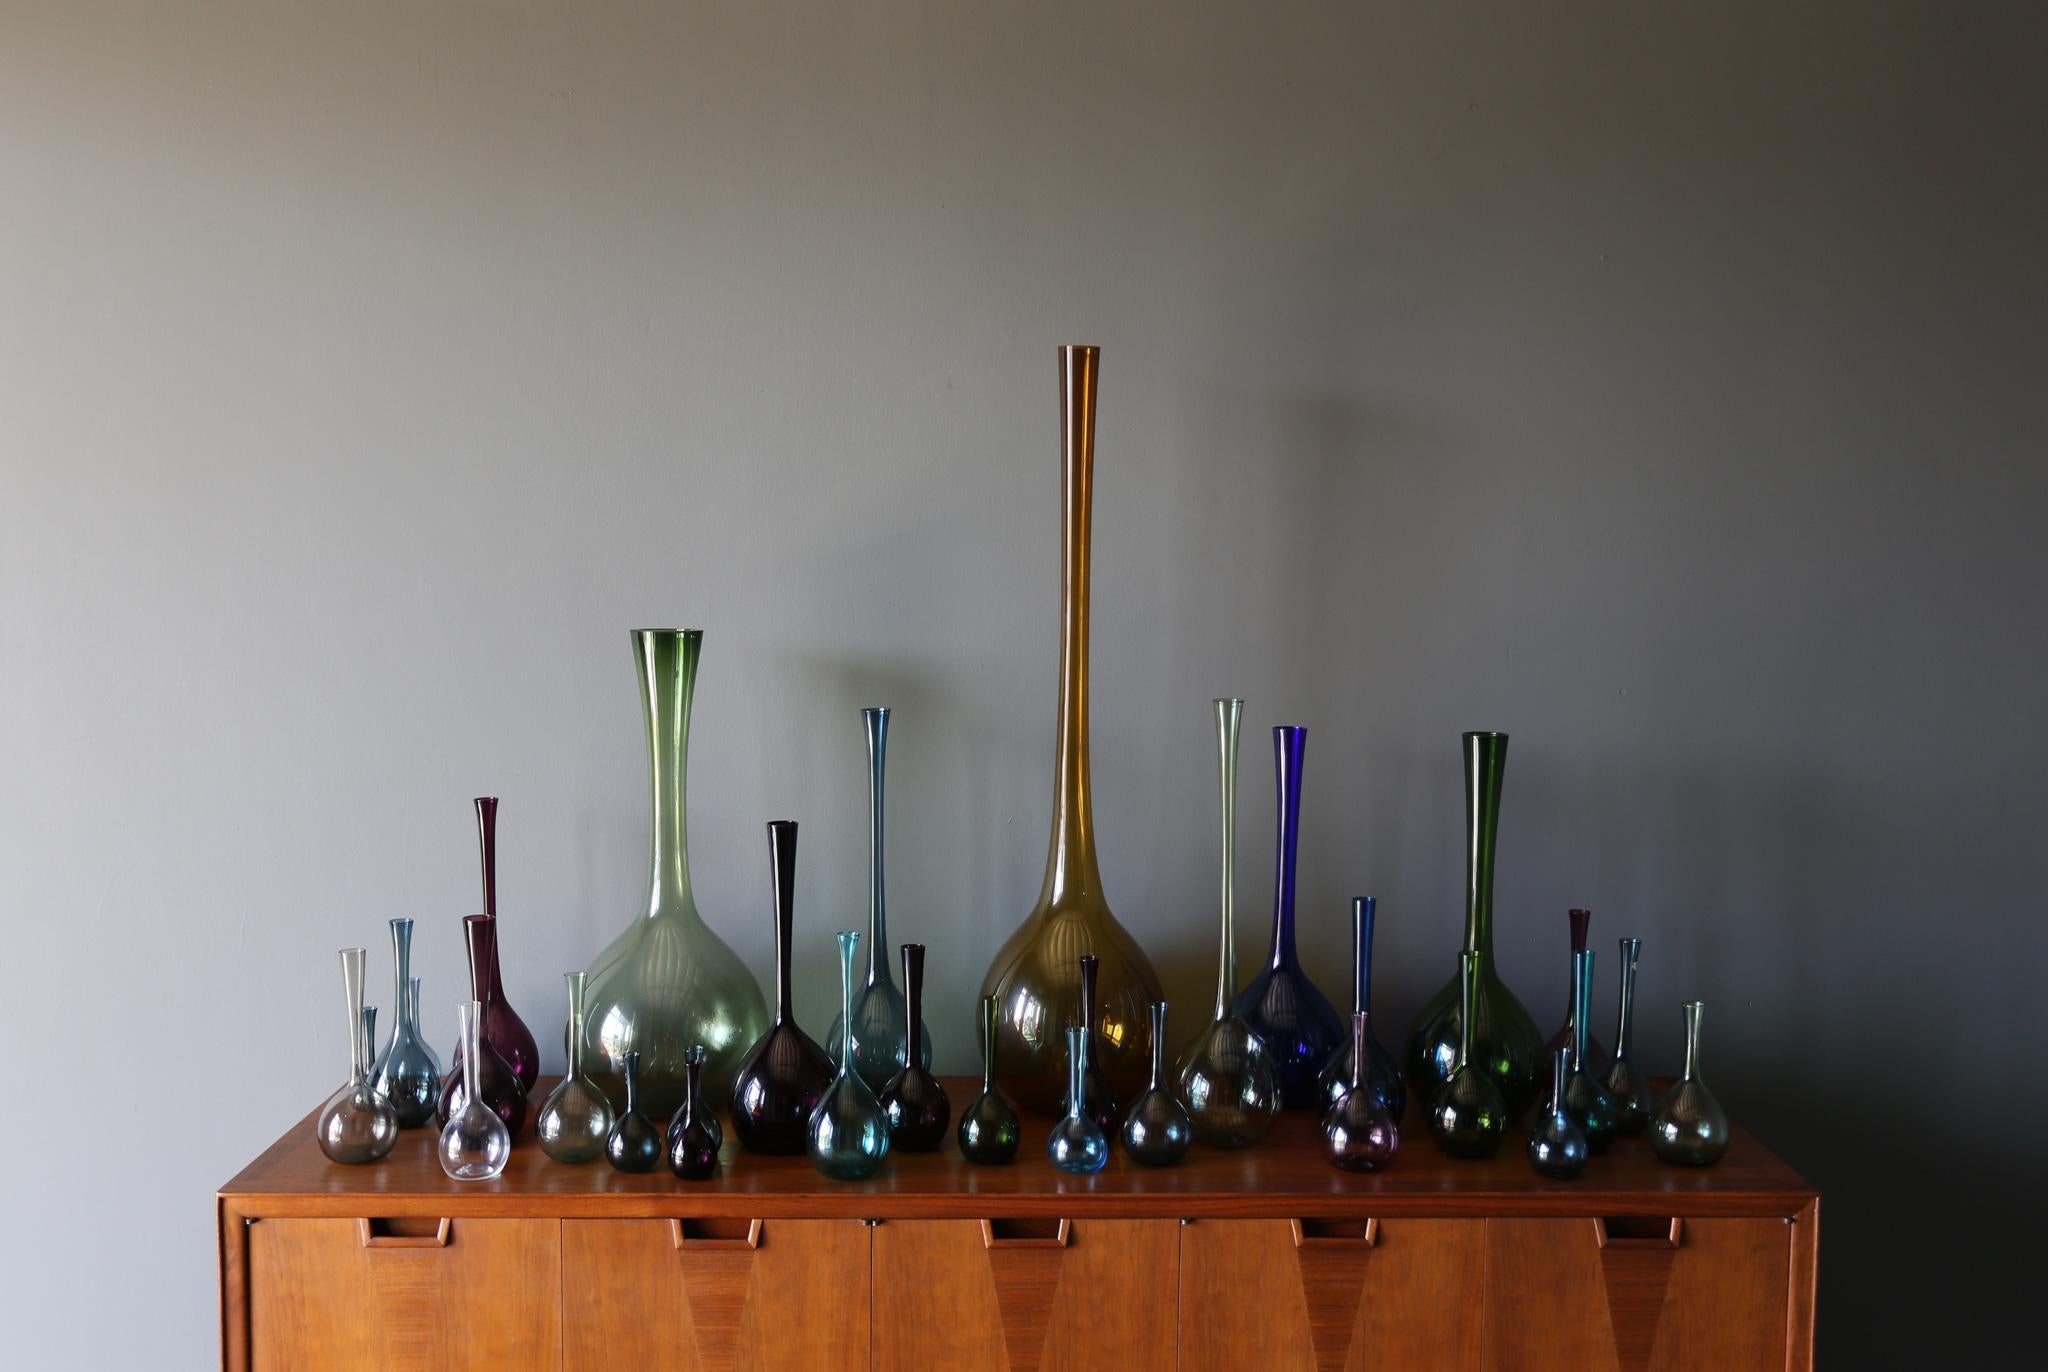 Arthur Percy Collection of 32 glass vases for Gullaskruf of Sweden. circa 1955 

The vases vary in size from 38.63